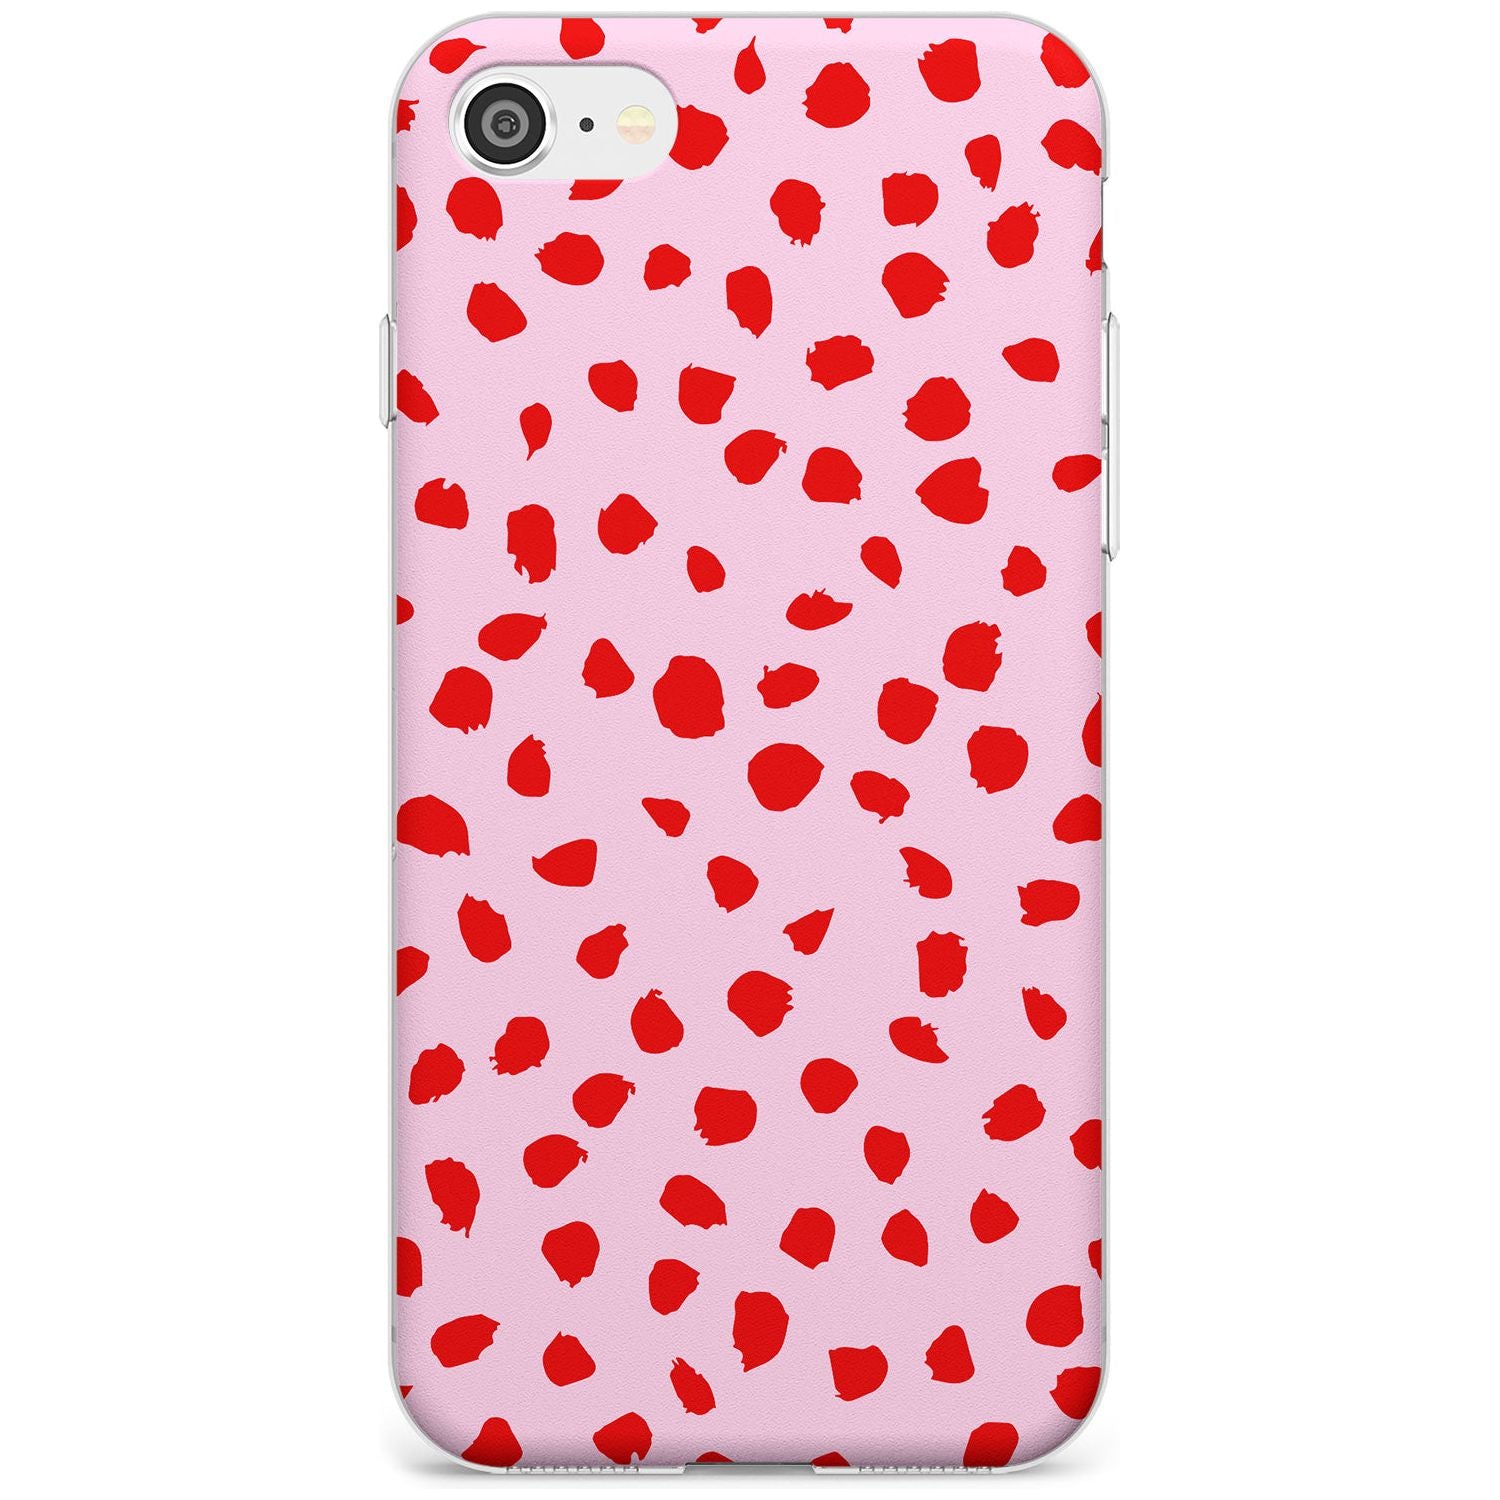 Red on Pink Dalmatian Polka Dot Spots Slim TPU Phone Case for iPhone SE 8 7 Plus